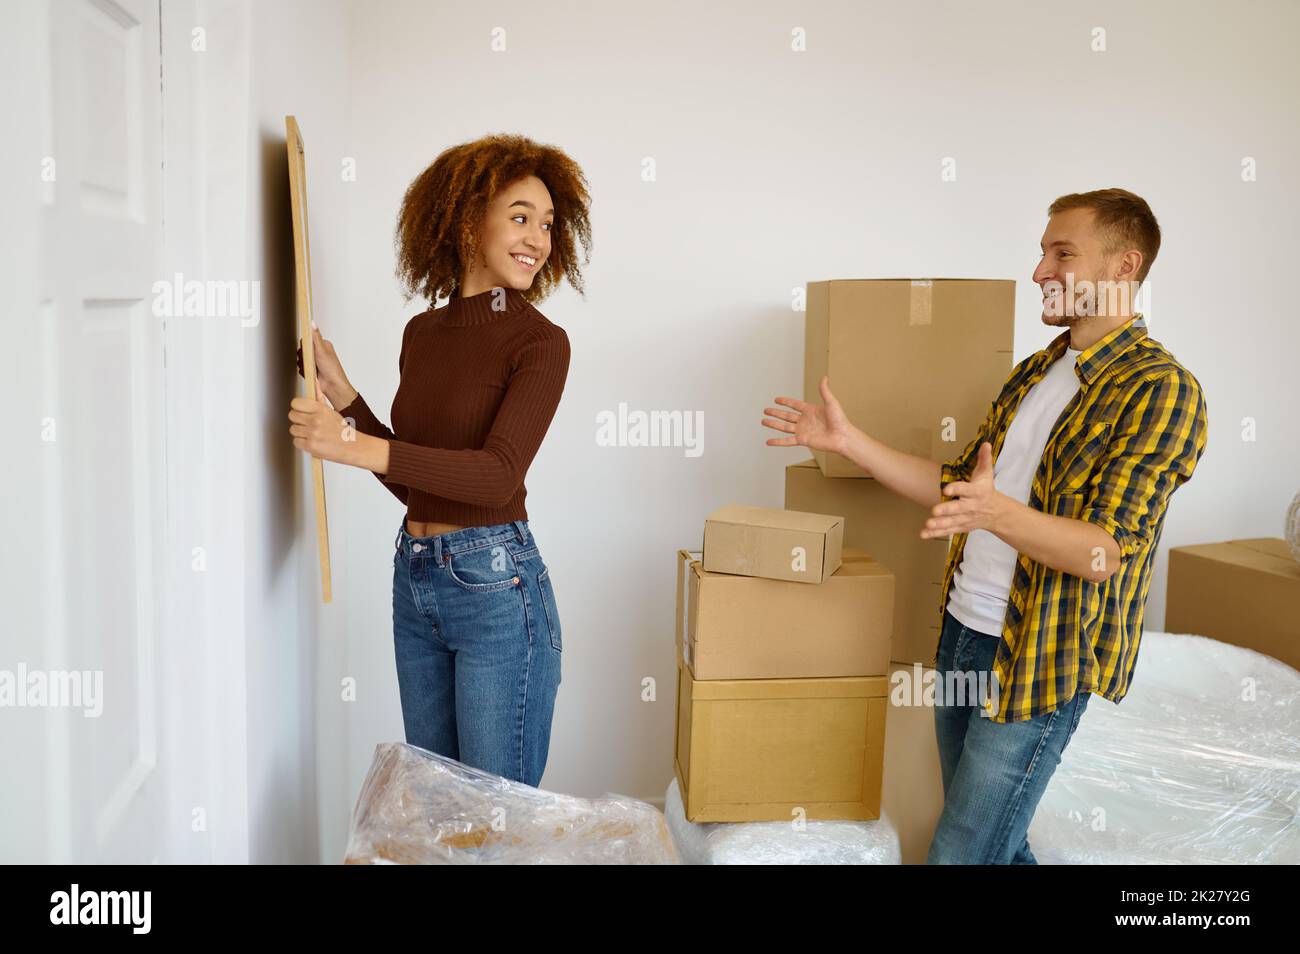 Woman hanging picture on the wall Stock Photo